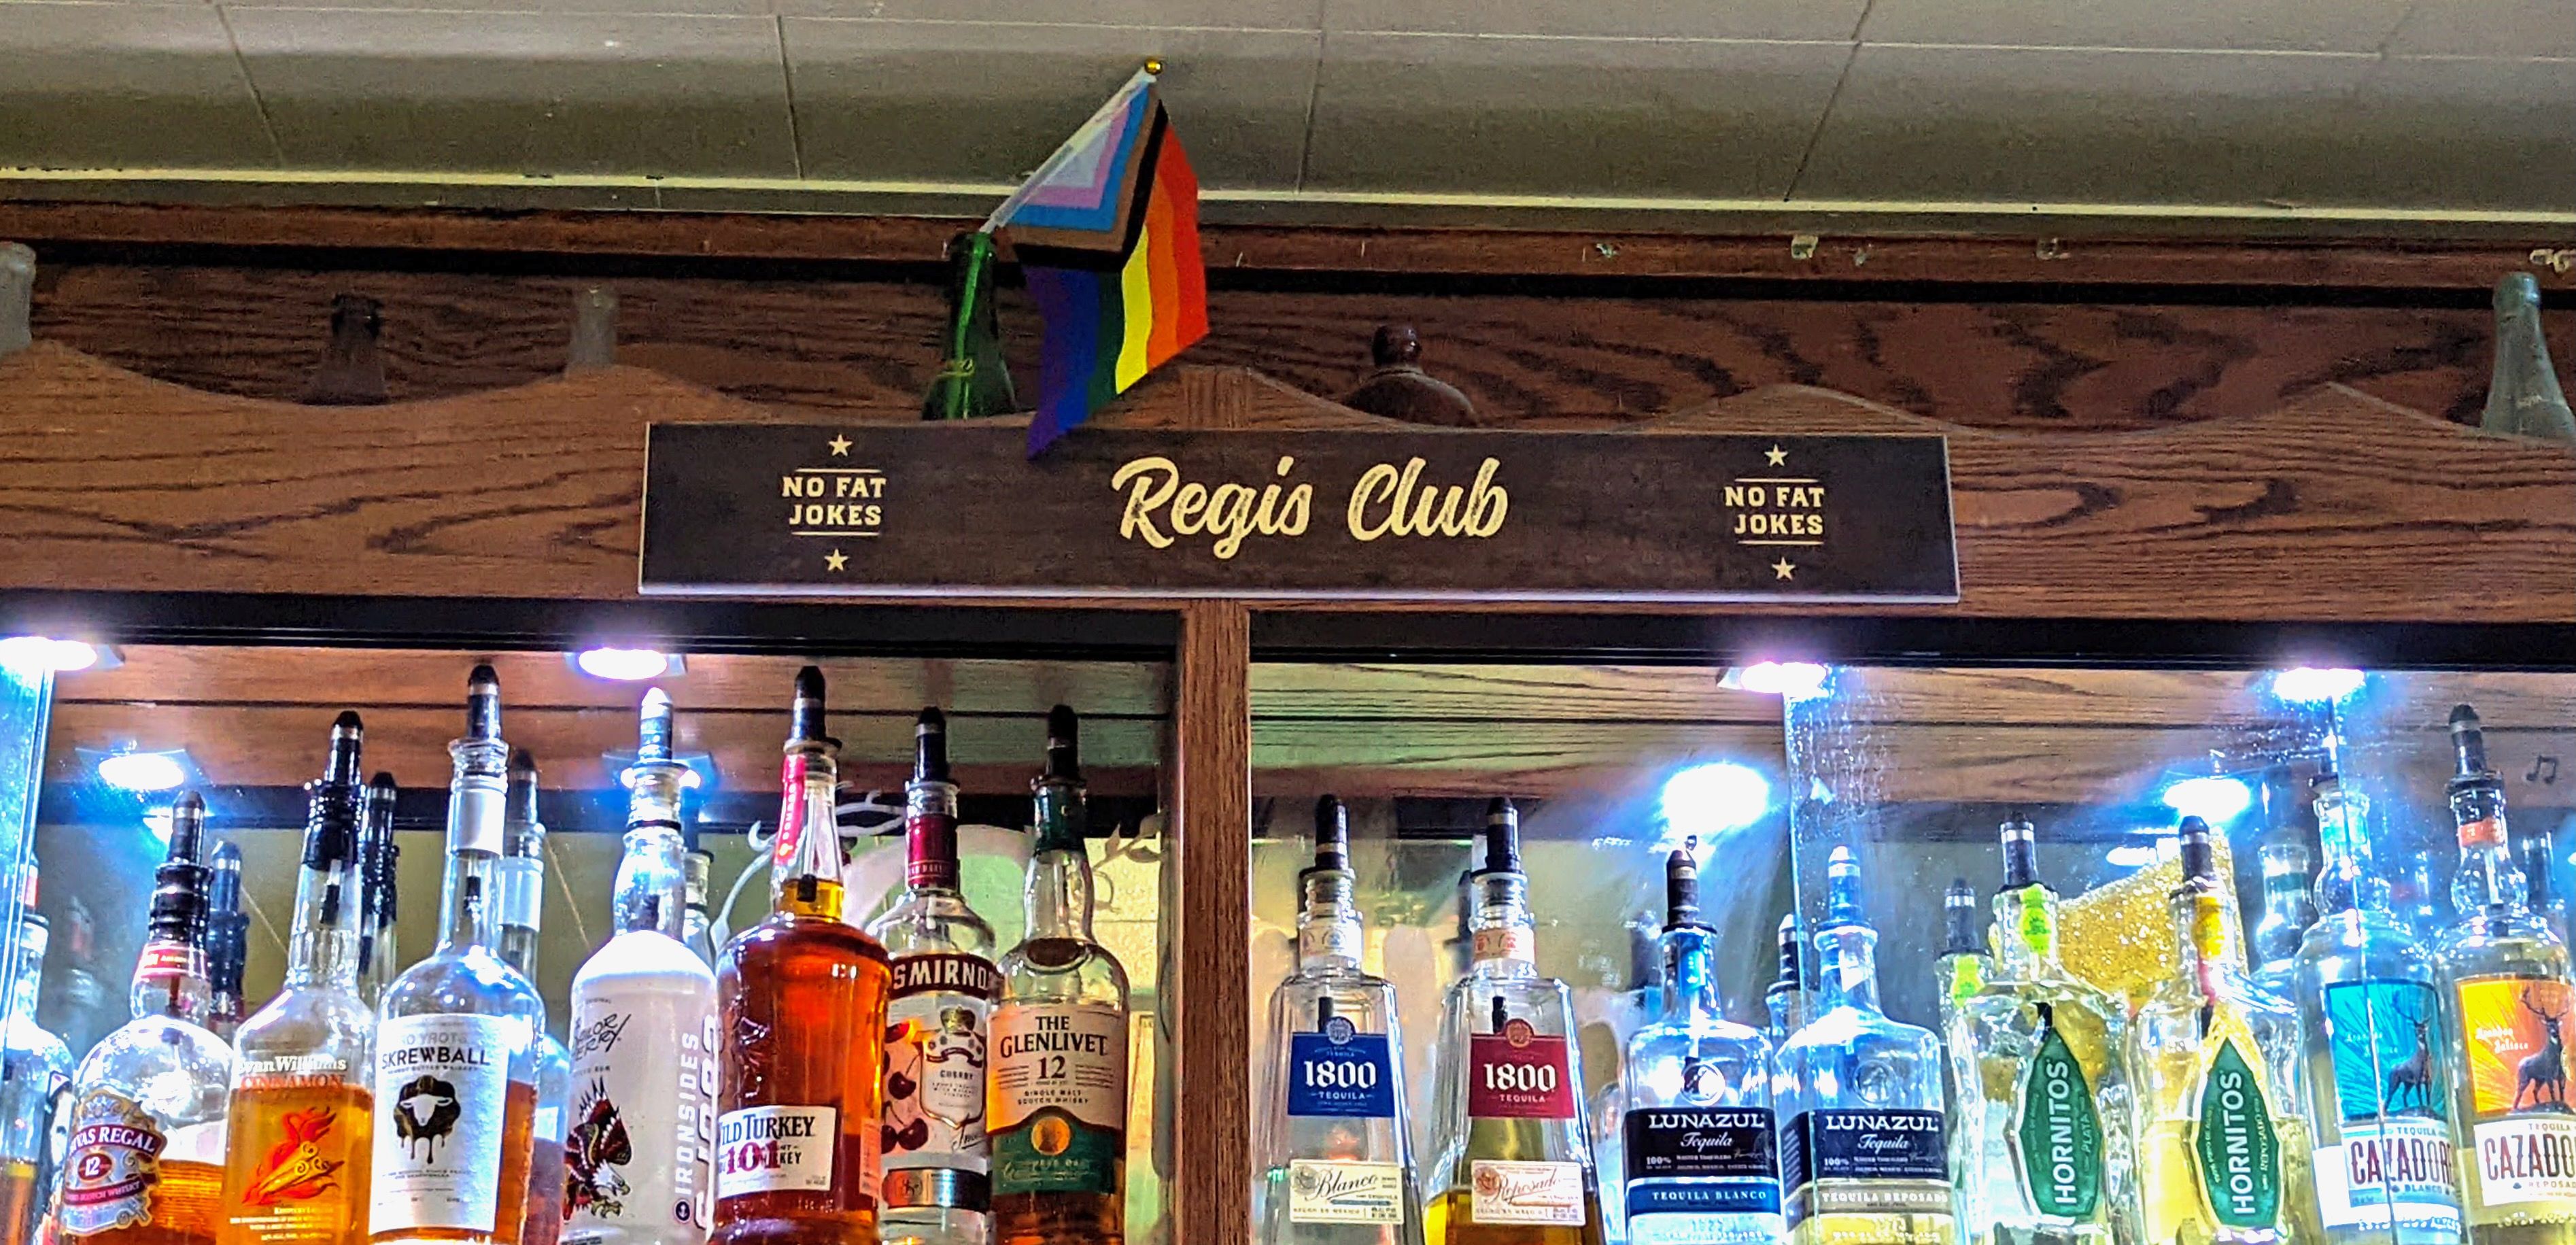 A sign reads "Regis Club: No fat jokes" with a pride flag hanging above it and bottles on a liquor cabinet below it. 